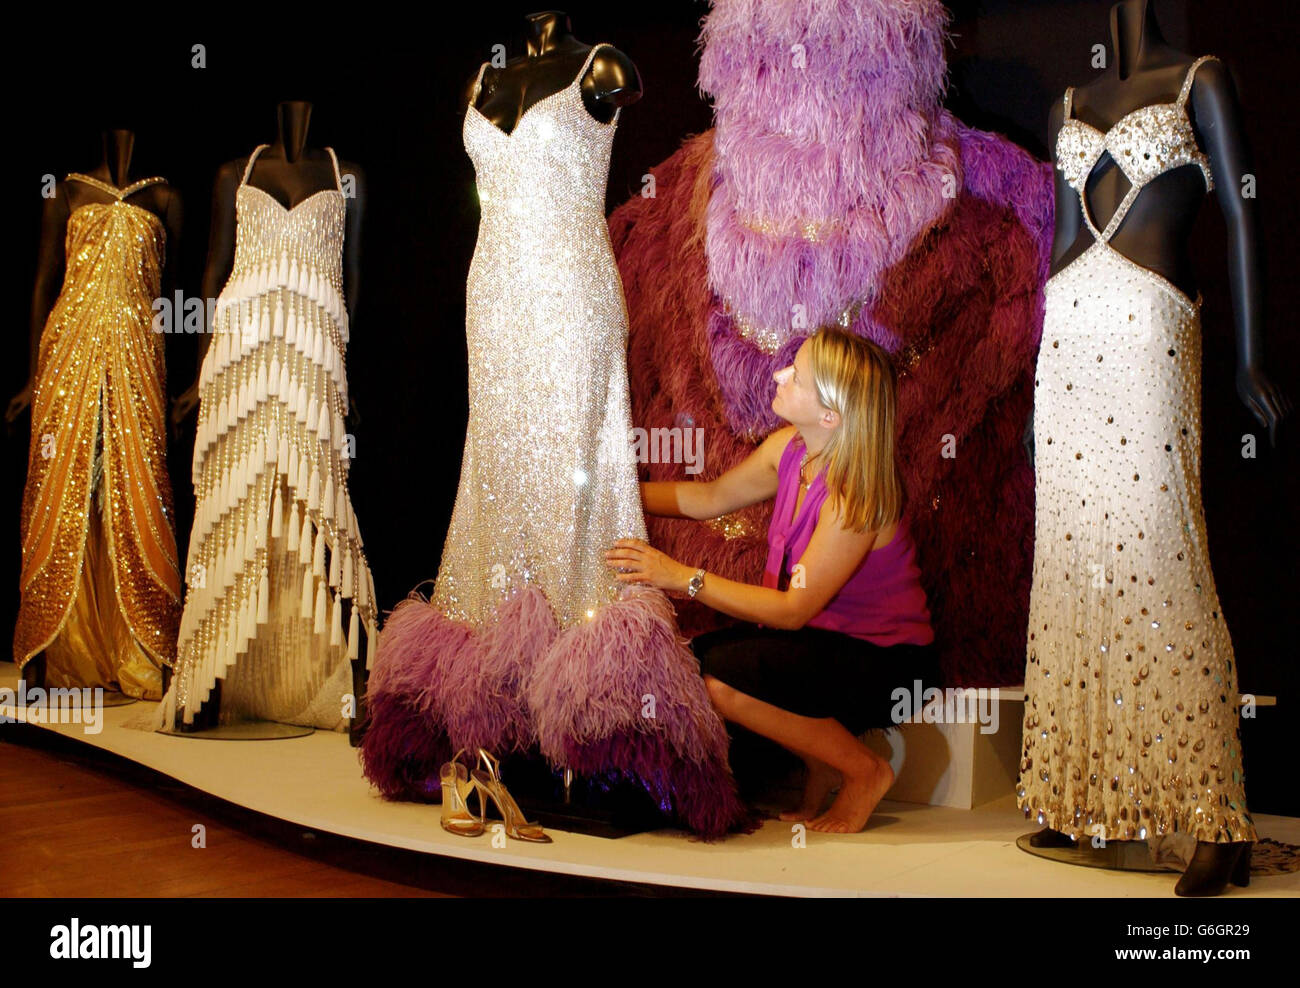 Gowns worn over the 50-year career of singer Dame Shirley Bassey are arranged for a charity auction at Christie's, by Jill Potterton. The proceeds from the sale, which takes place next Thursday, are to go to two Welsh Charities; The Dame Shirley Bassey Scholarship and the Noah's Ark Appeal. From left the gowns, all designed by Douglas Darnell, are as follows; Goldfinger (1960s-70s, worn in the James Bond film whose title song was sung by Dame Shirley), a 'shimmy' dress (1990s), the Diamond Dress (1955-80s) and the White Harem Dress (1960s). Stock Photo